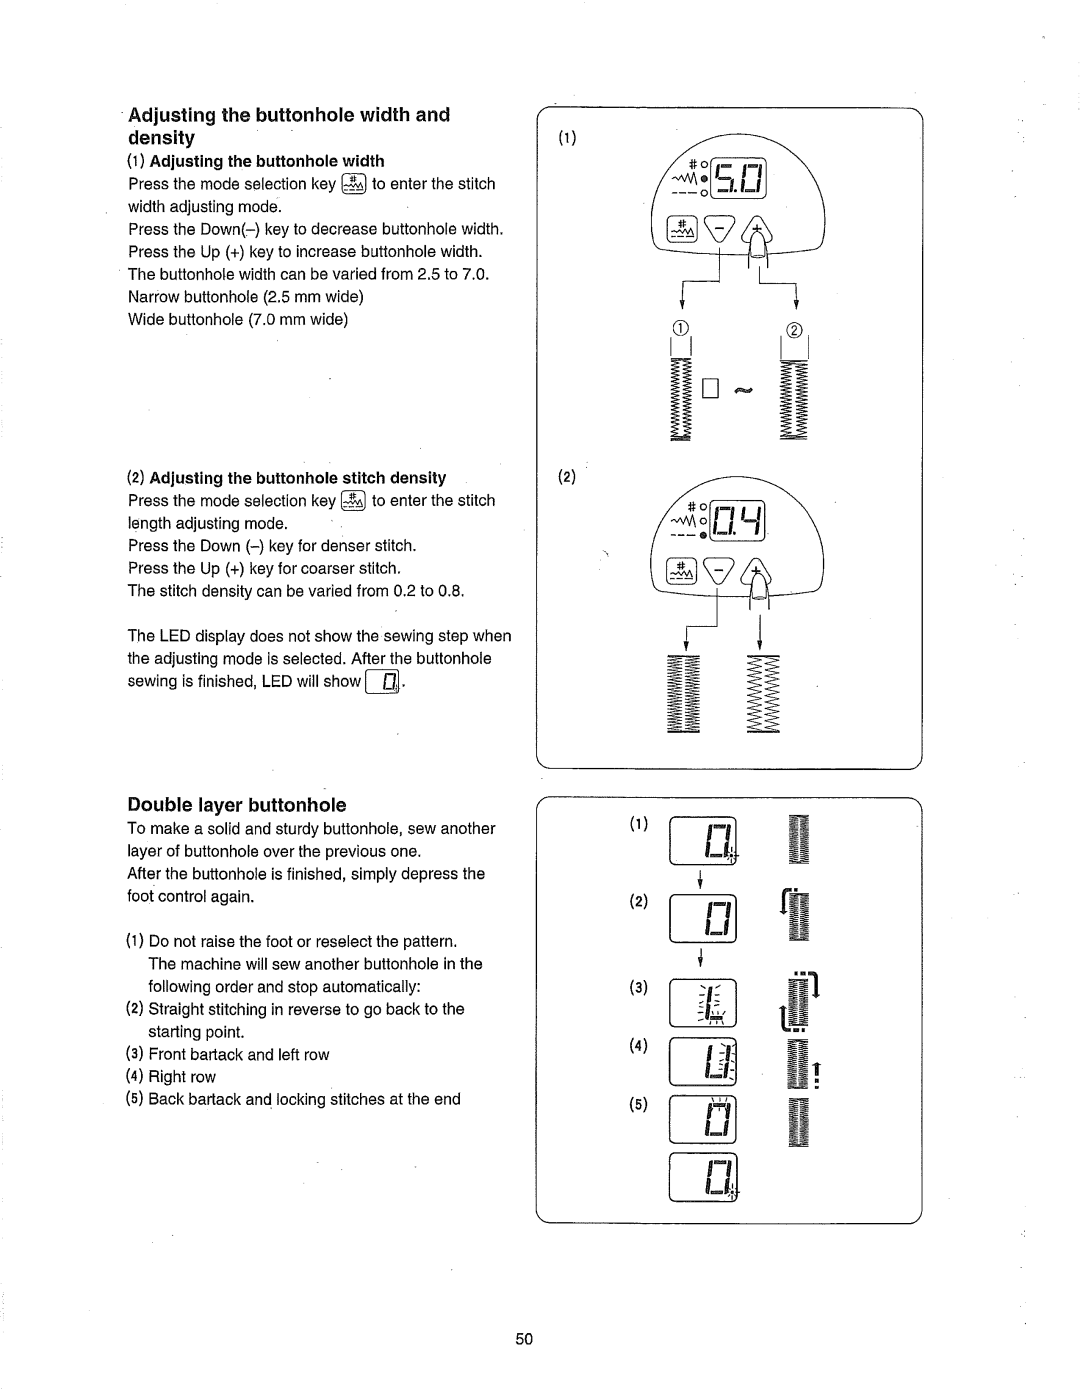 Janome 385.80802 owner manual Adjusting the buttonhole width and density, Double layer buttonhole 